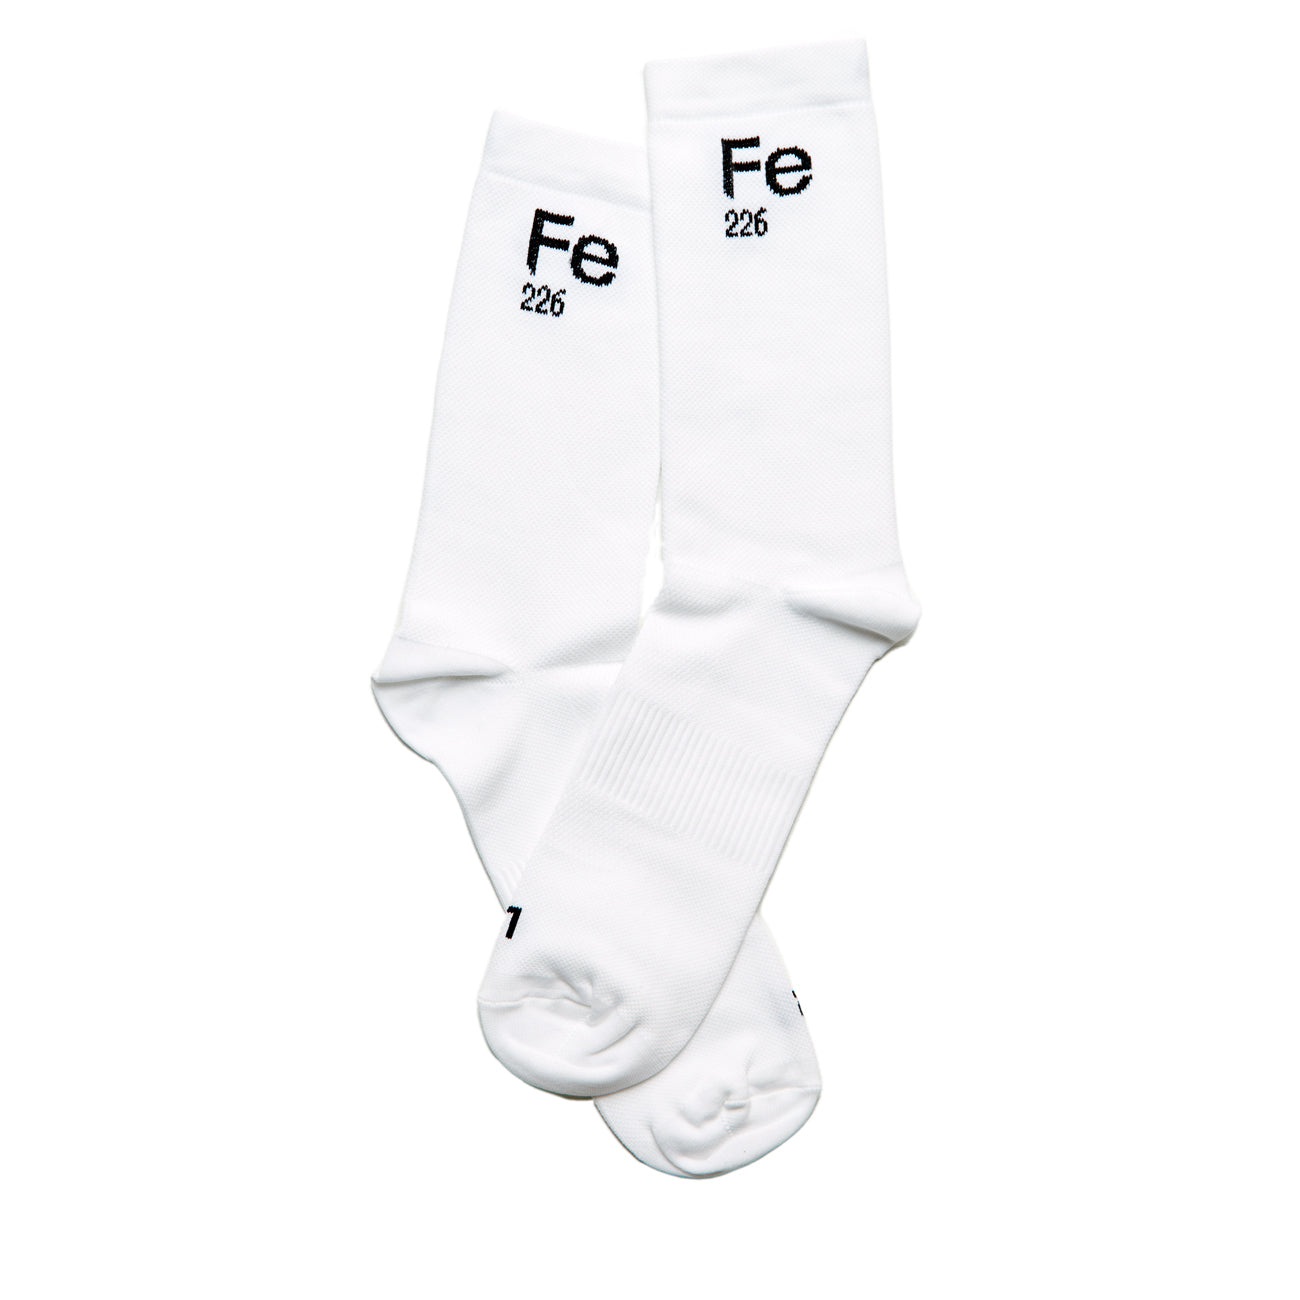 Fe226 Running and Cycling Socks White